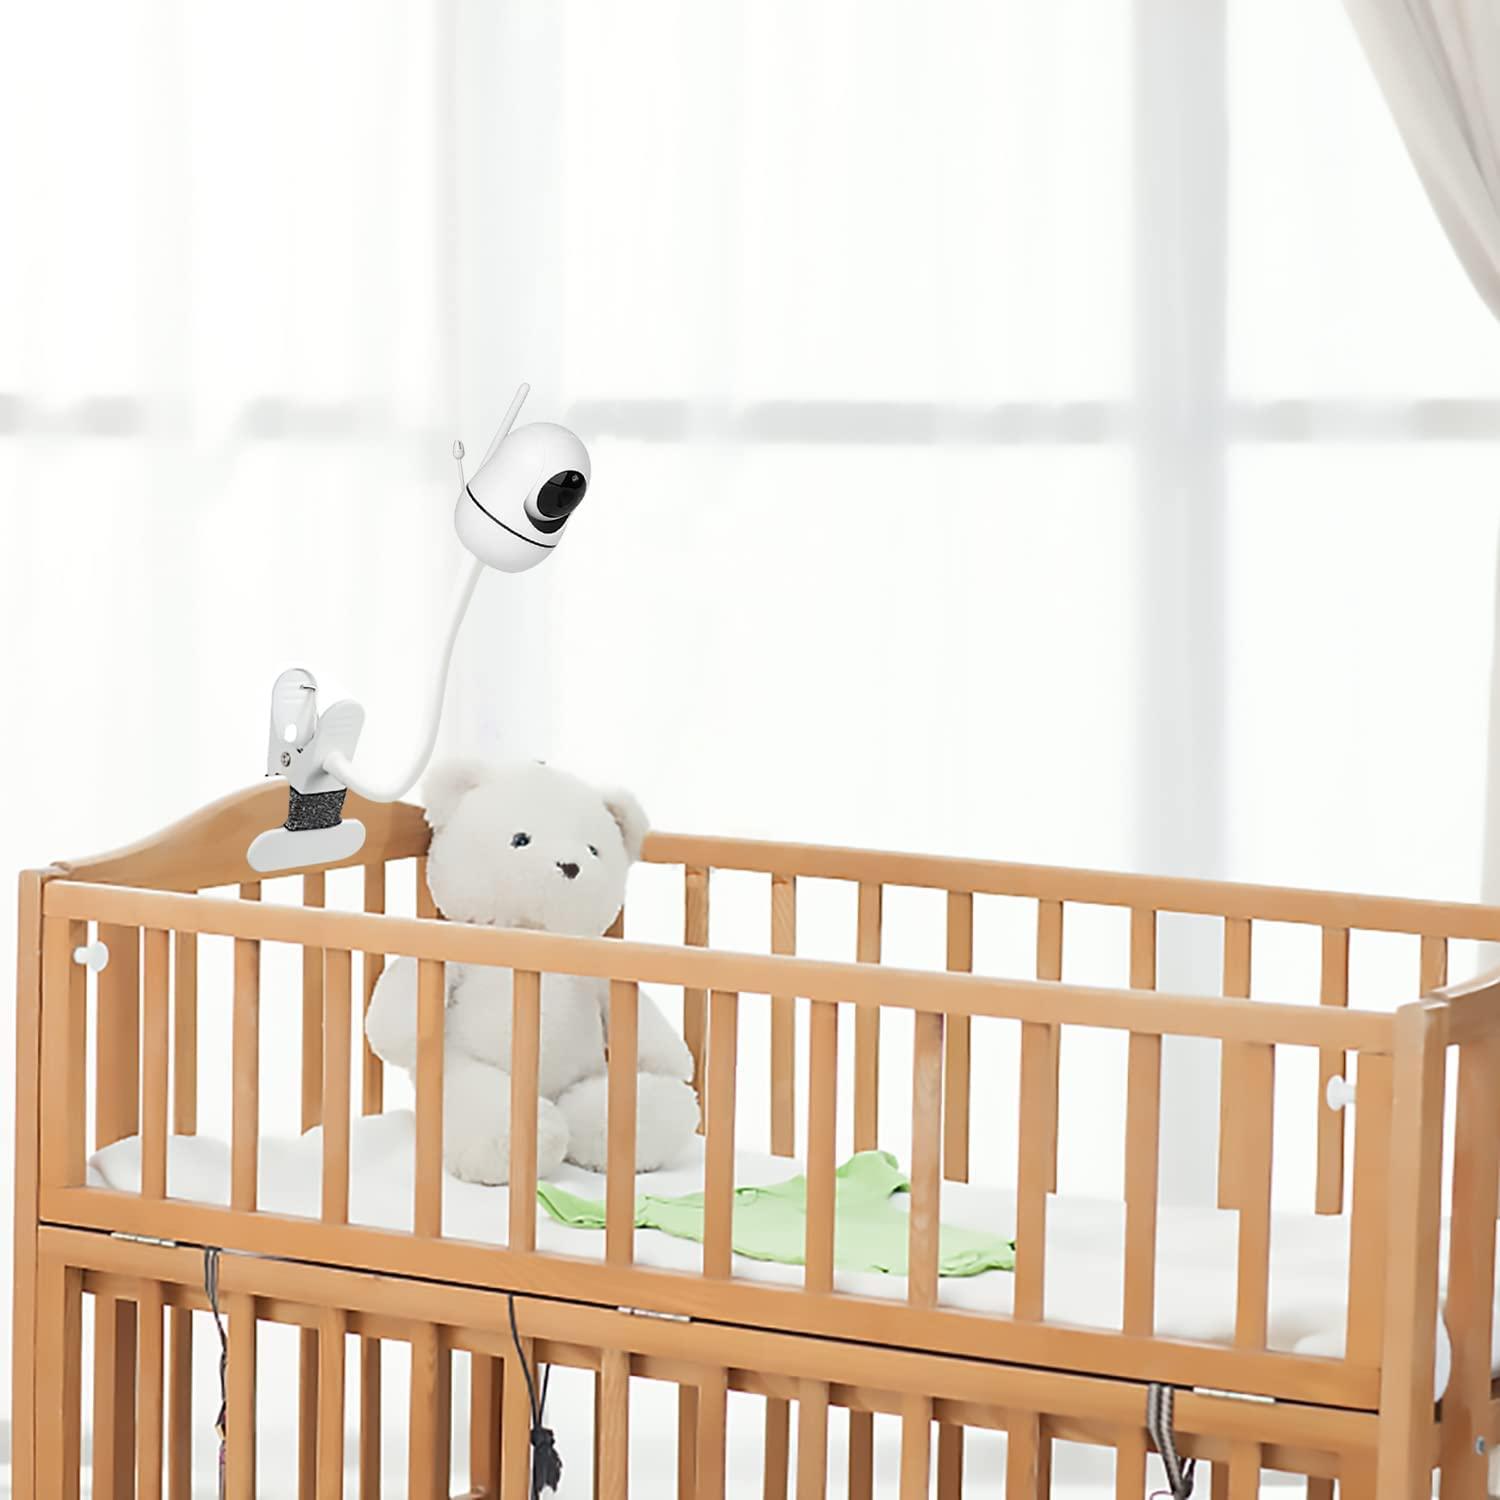 HelloBaby Baby Monitor Mount Works HB6550HB65HB66HB6351HB40HB6339HB6336,  Flexible Arm Bracket, Hello Baby Monitor Holder Attache